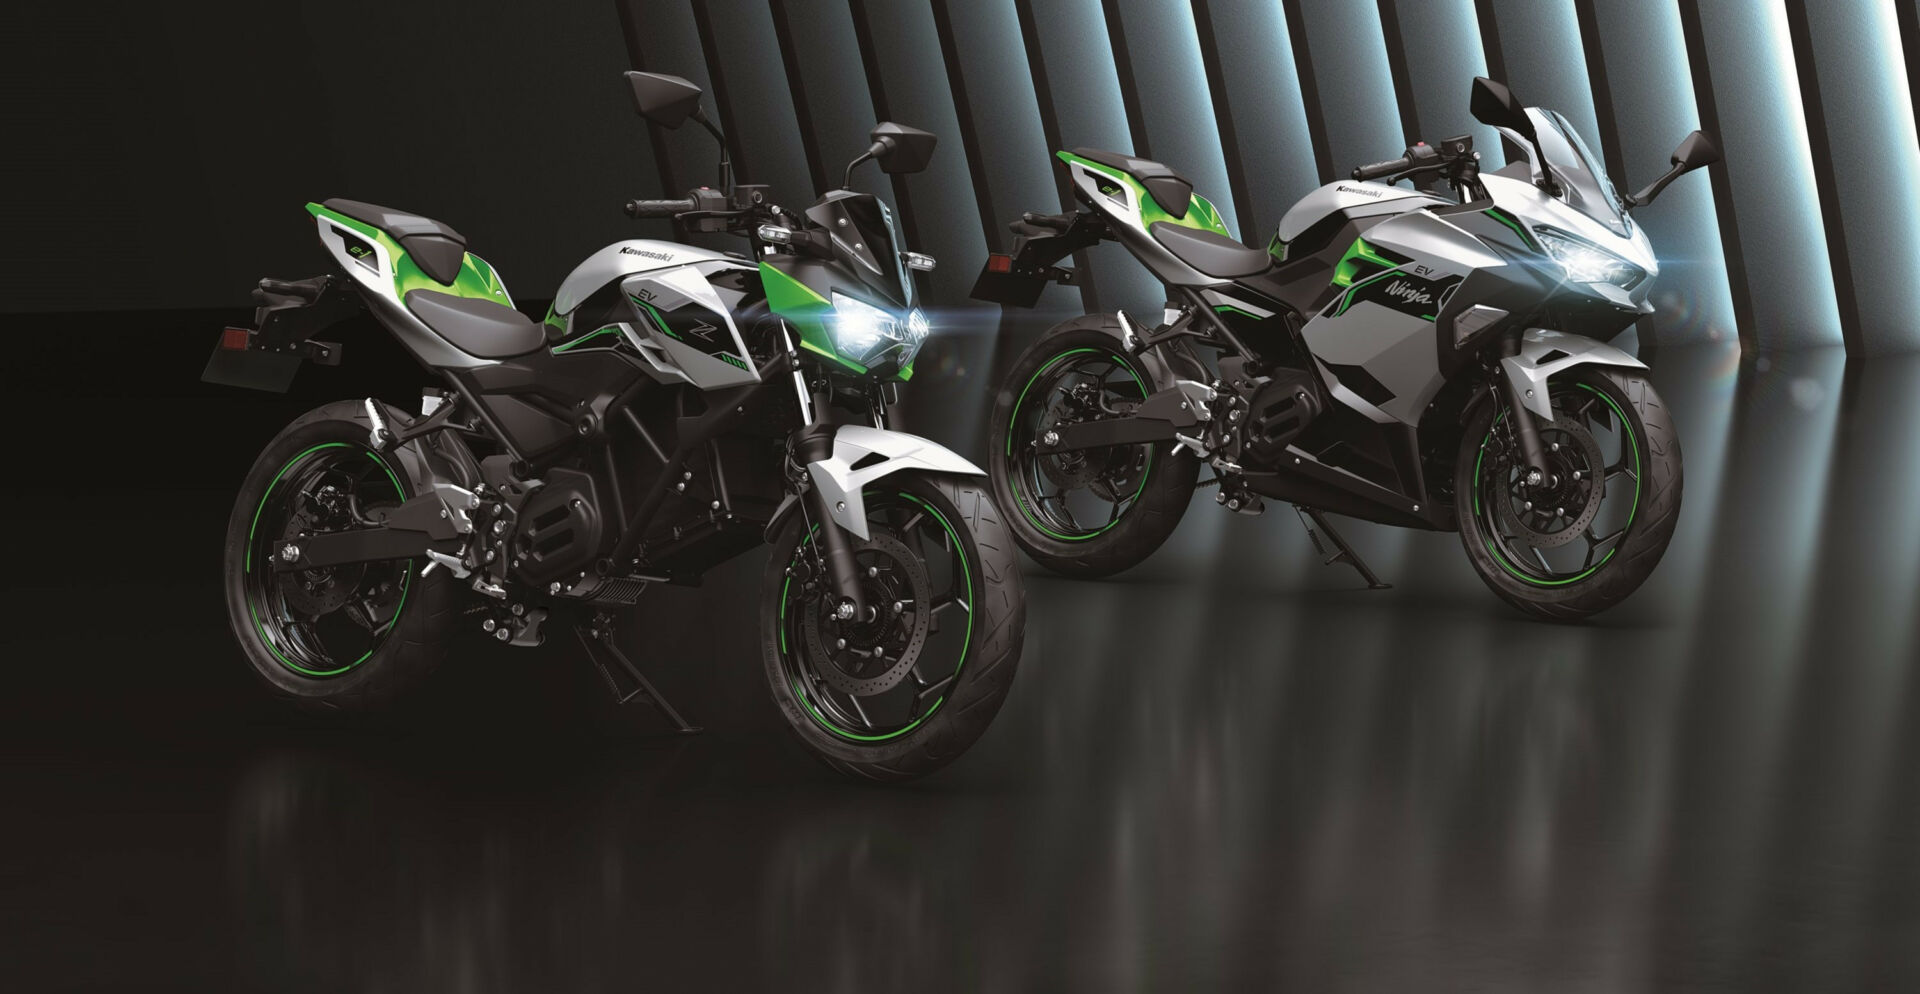 Kawasaki Now Accepting Orders For New Electric Streetbikes